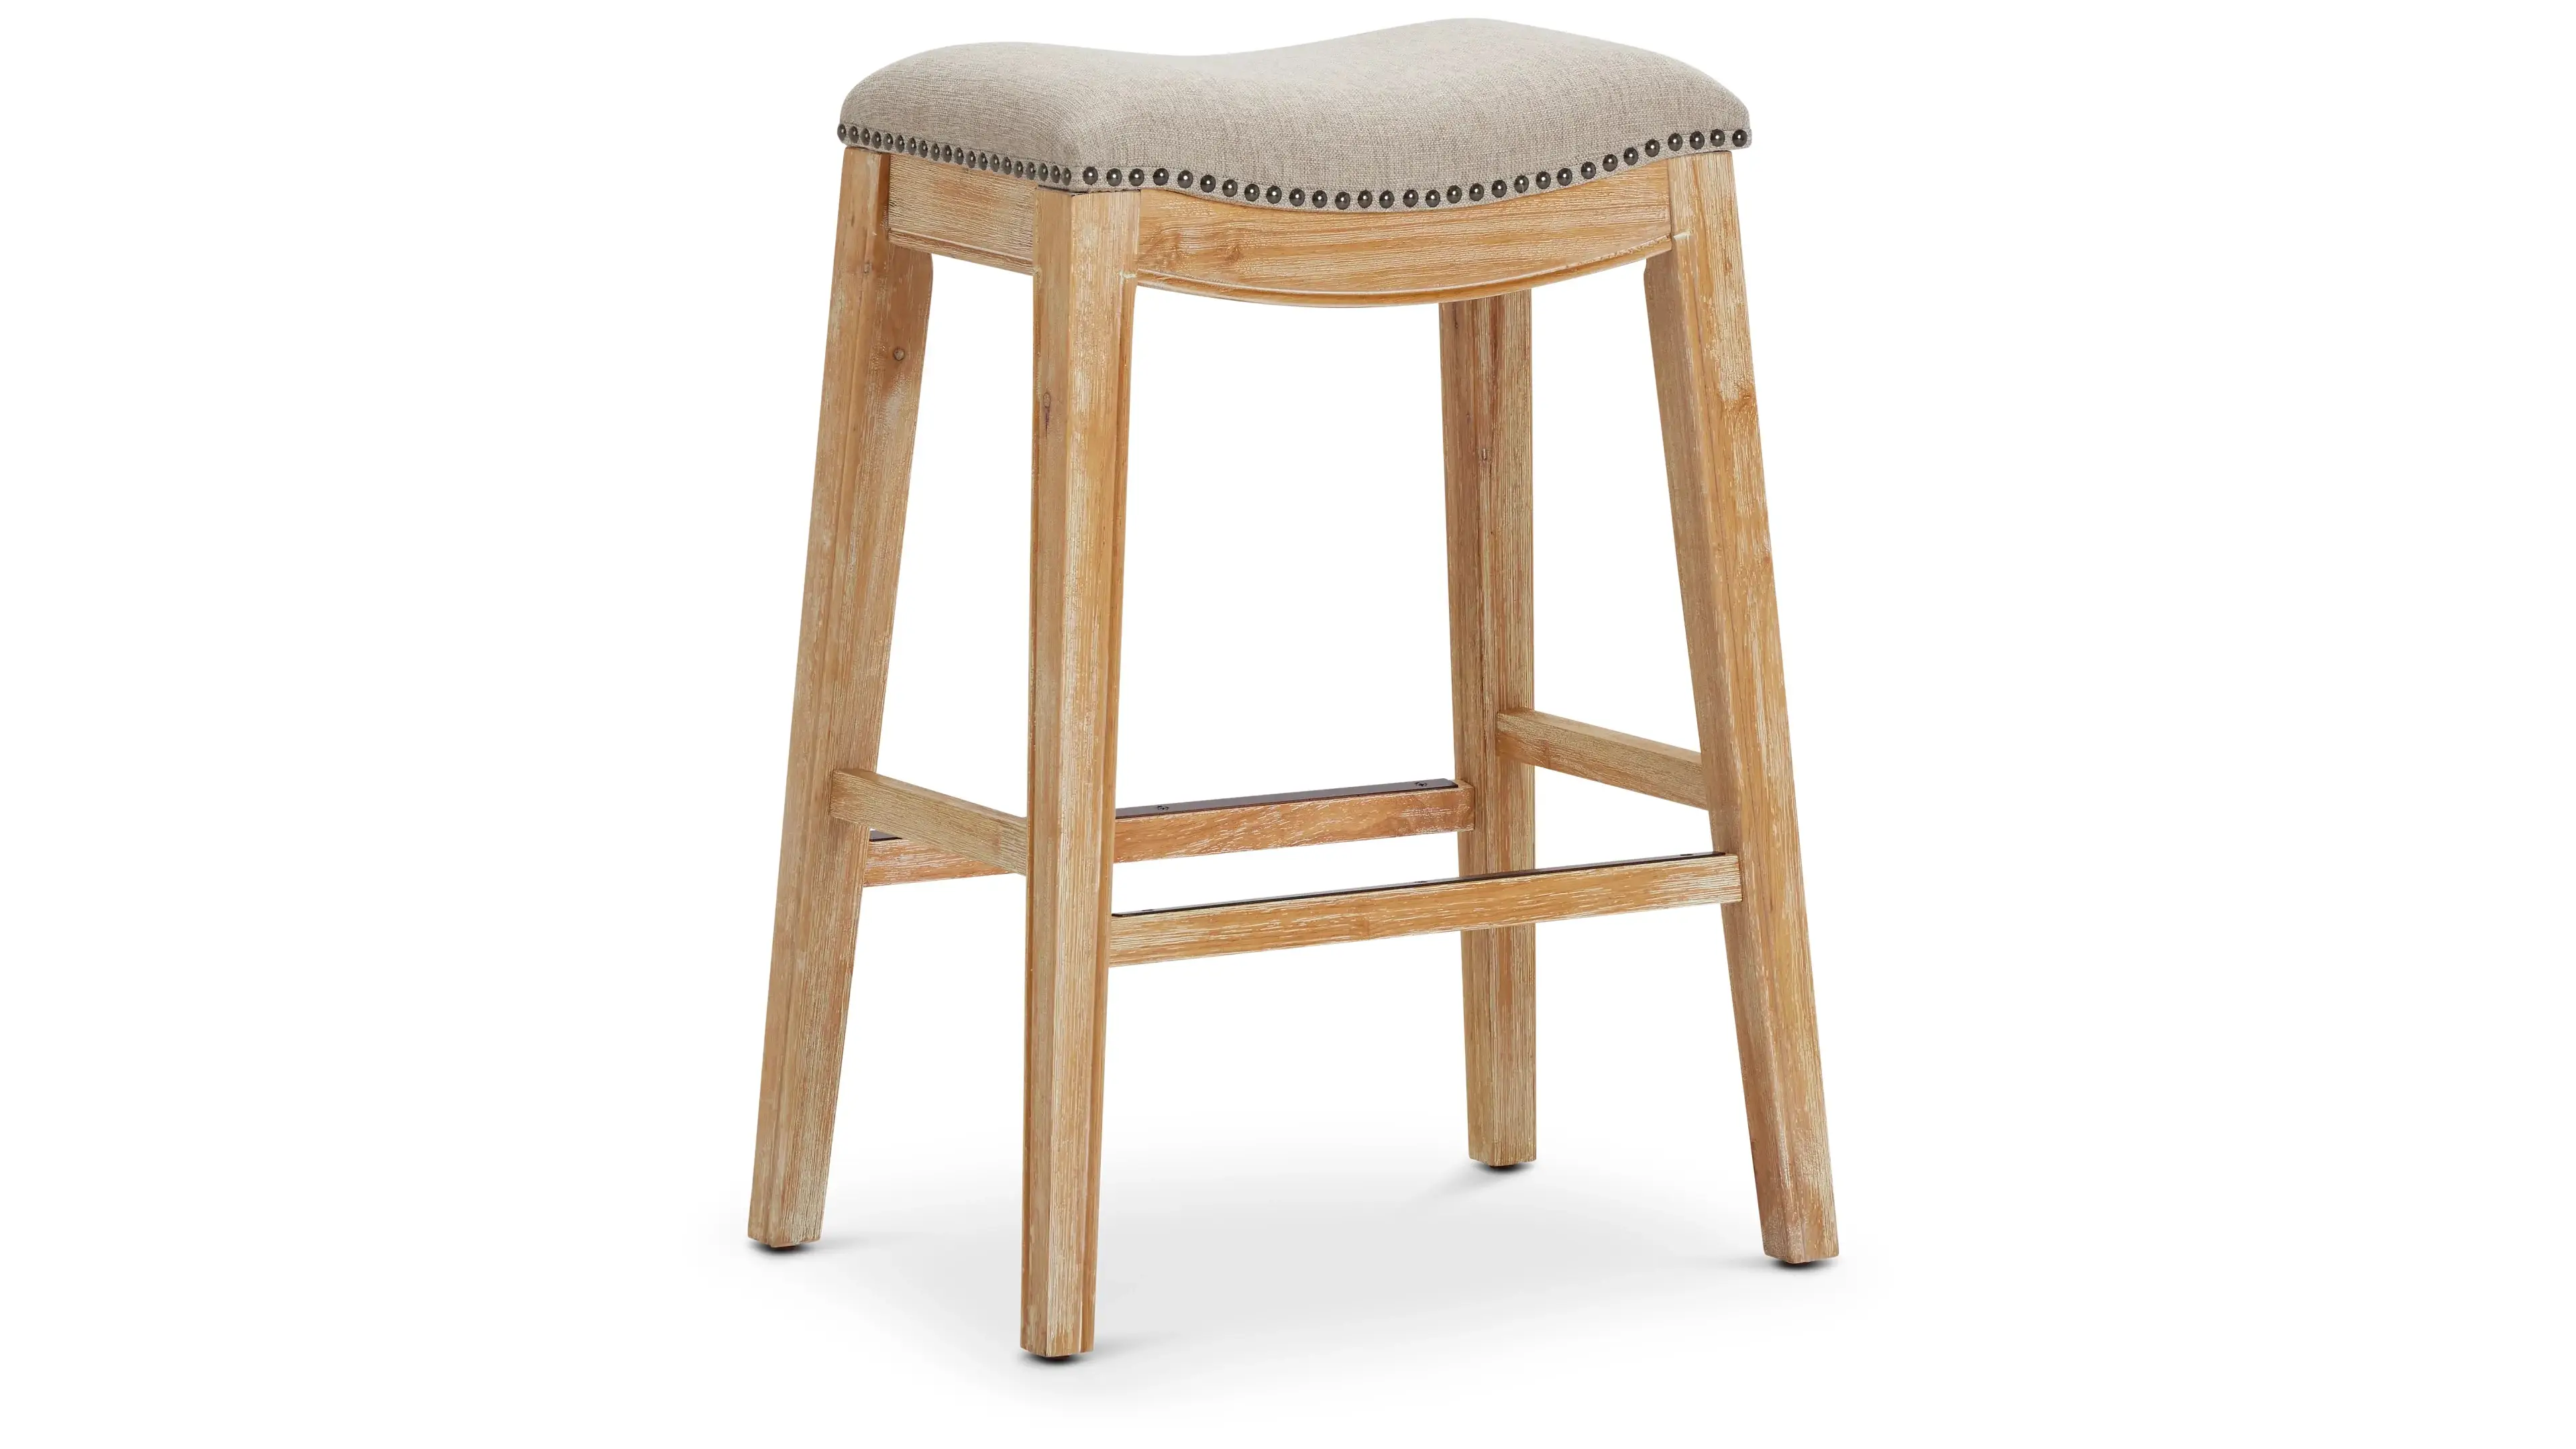 Take A Seat: Choosing the Right Barstools for Your Home